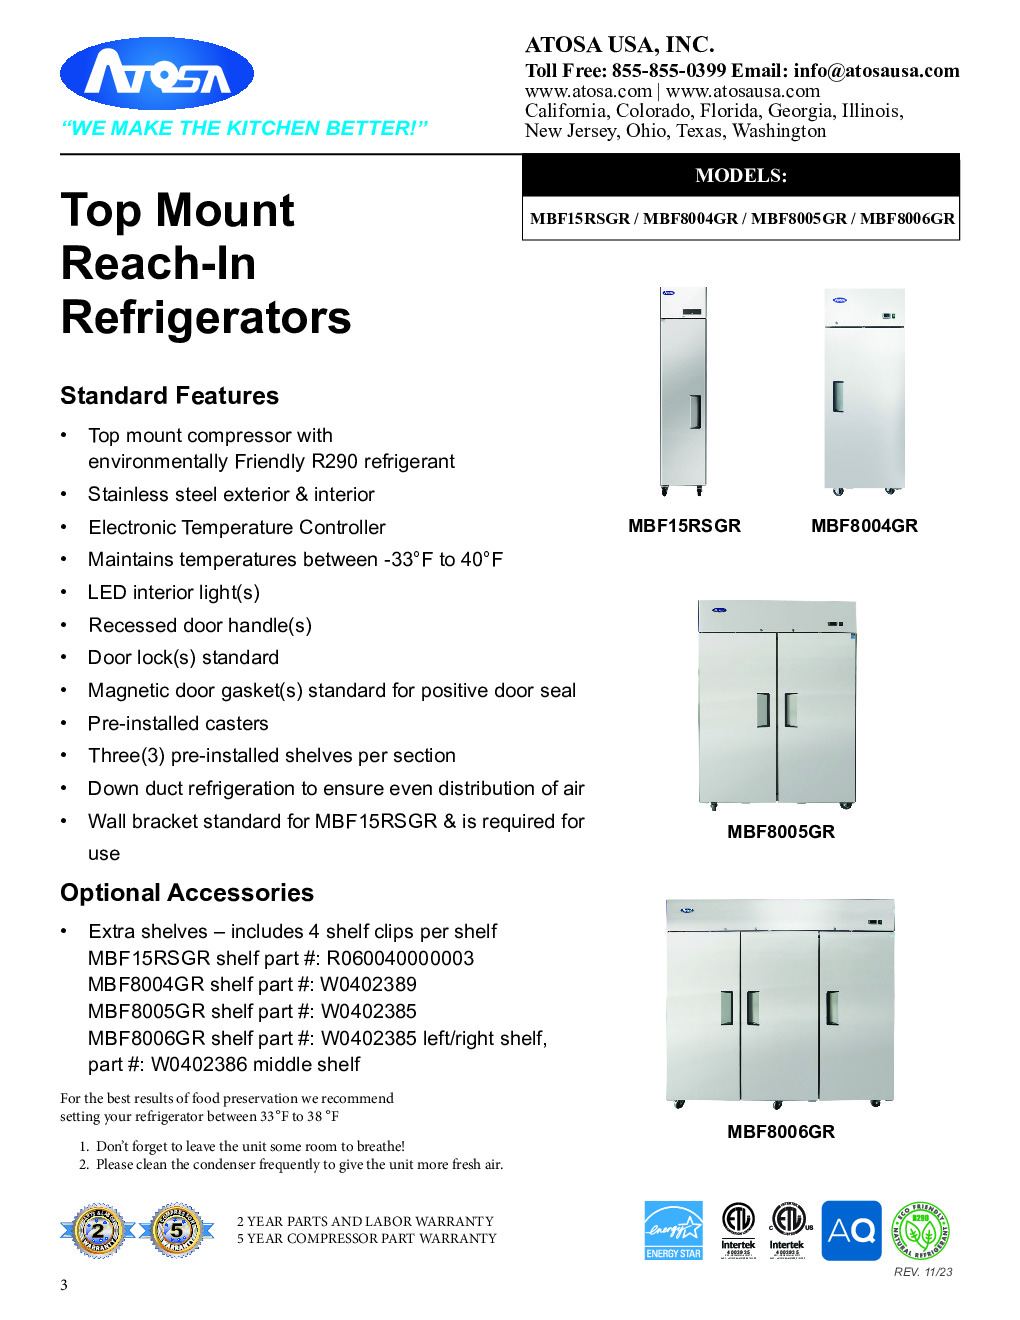 Atosa USA MBF15RSGR One Section Slim Reach-In Refrigerator w/ Solid Door, Top Mounted, Stainless Steel, 13 cu. ft.